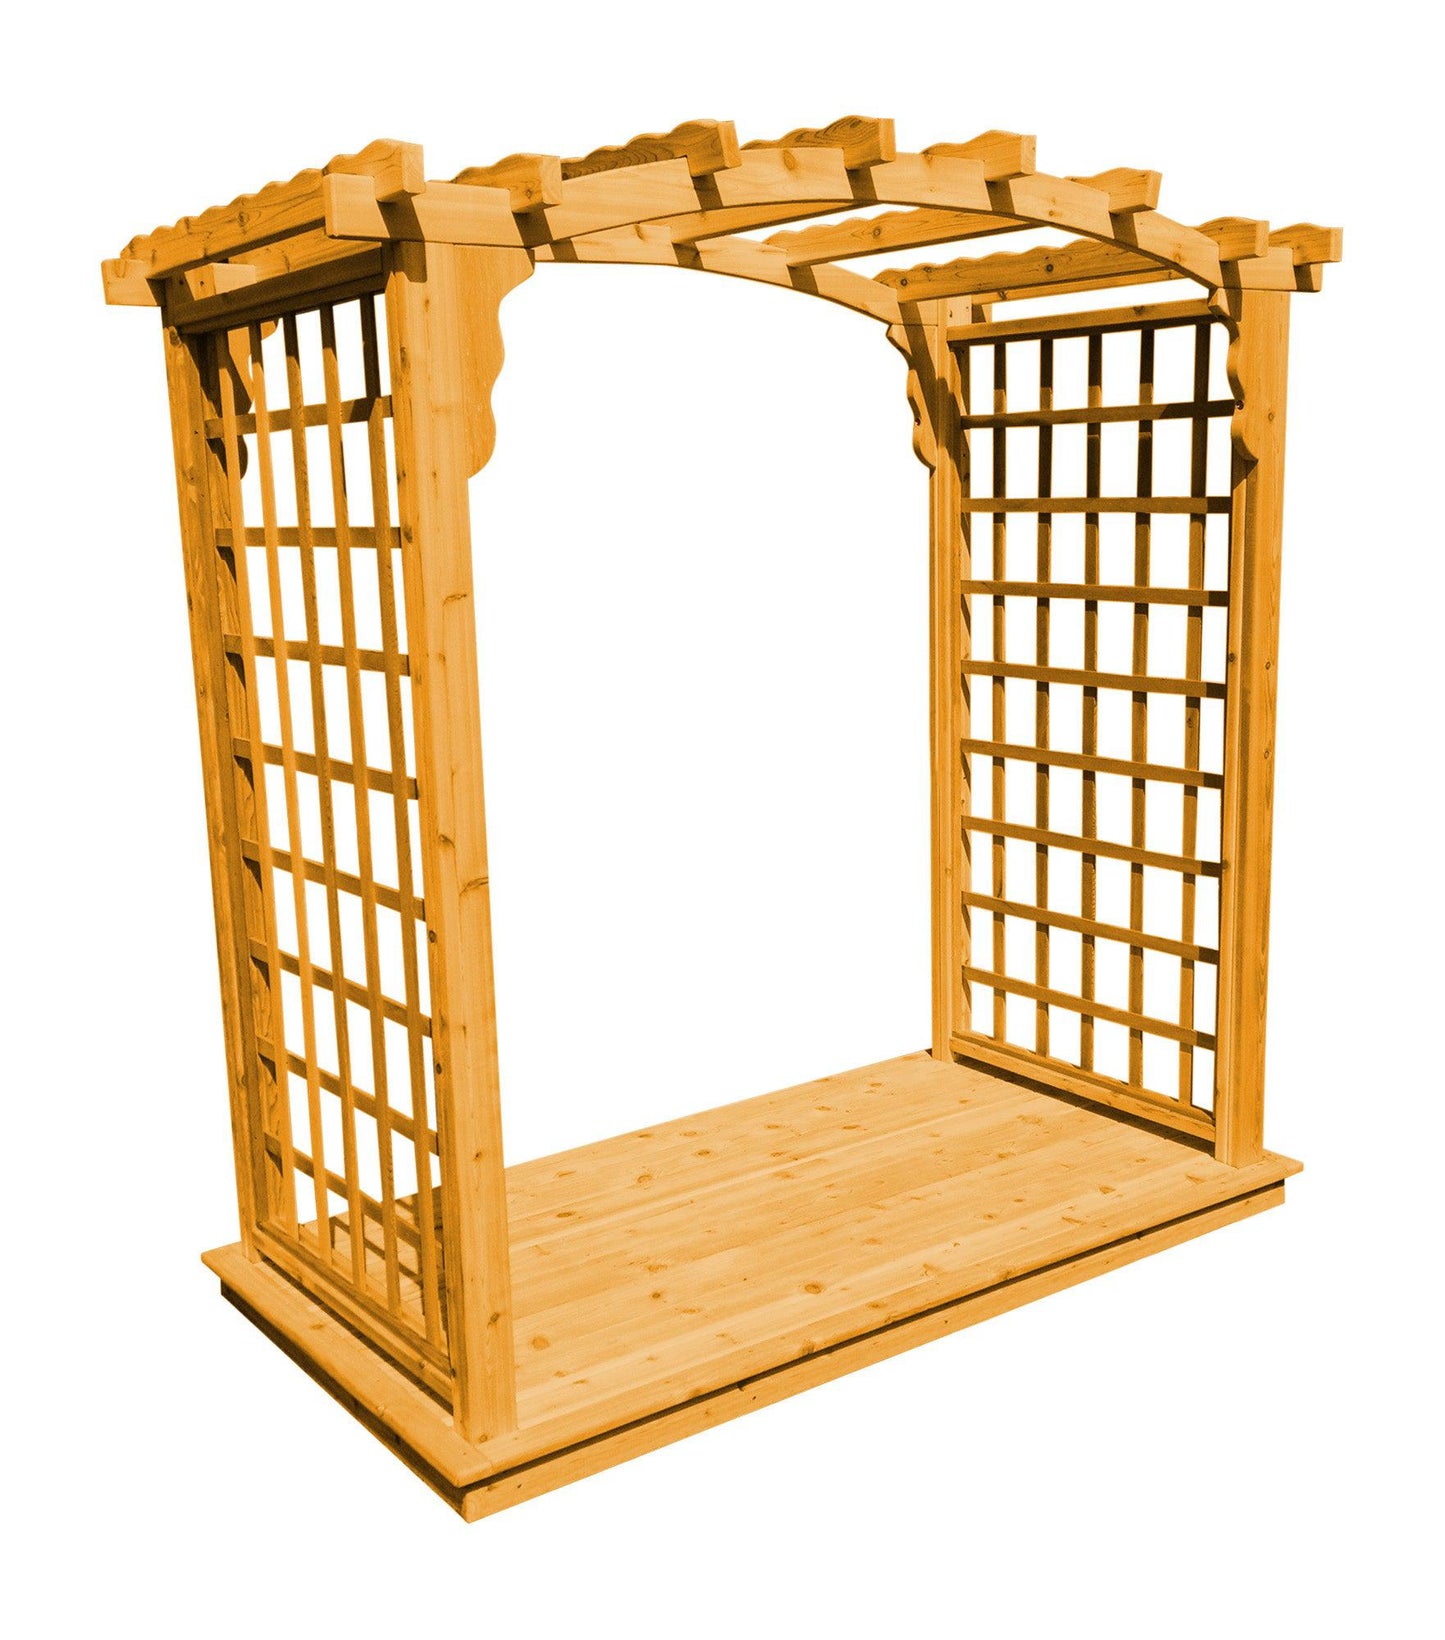 A&L Furniture Co. Western Red Cedar 4' Cambridge Arbor & Deck - LEAD TIME TO SHIP 2 WEEKS